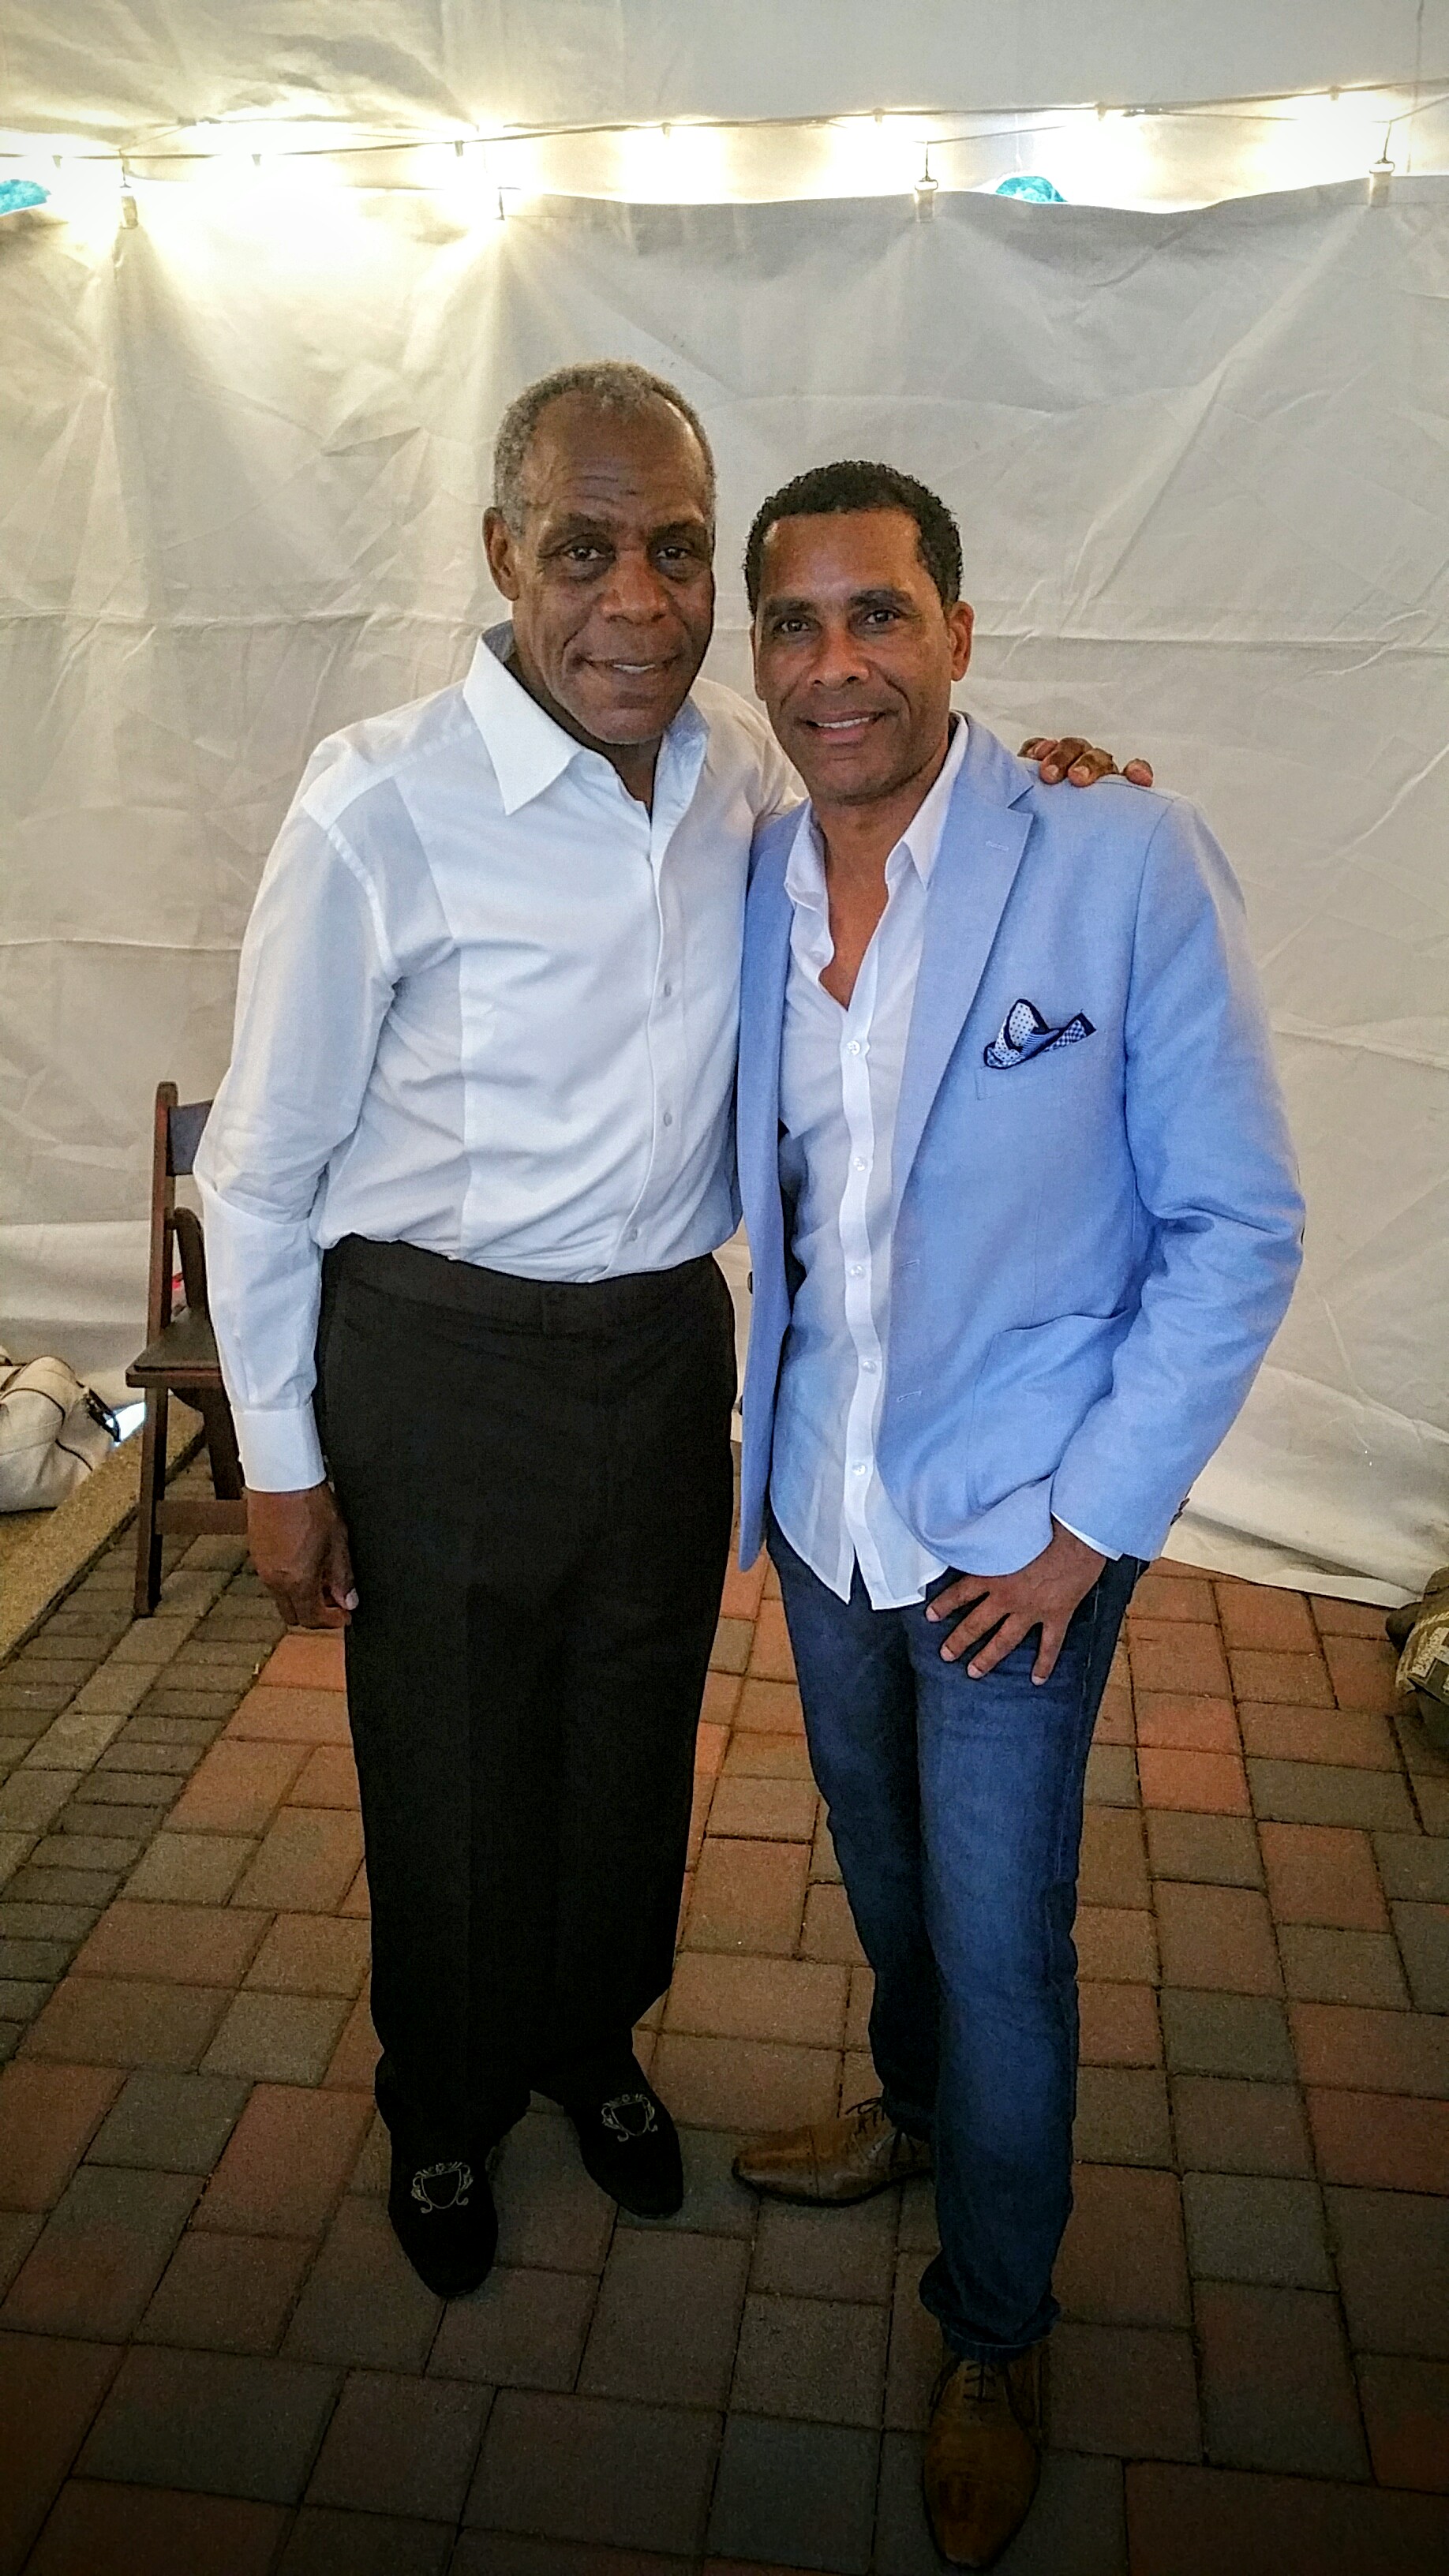 WIth Danny Glover